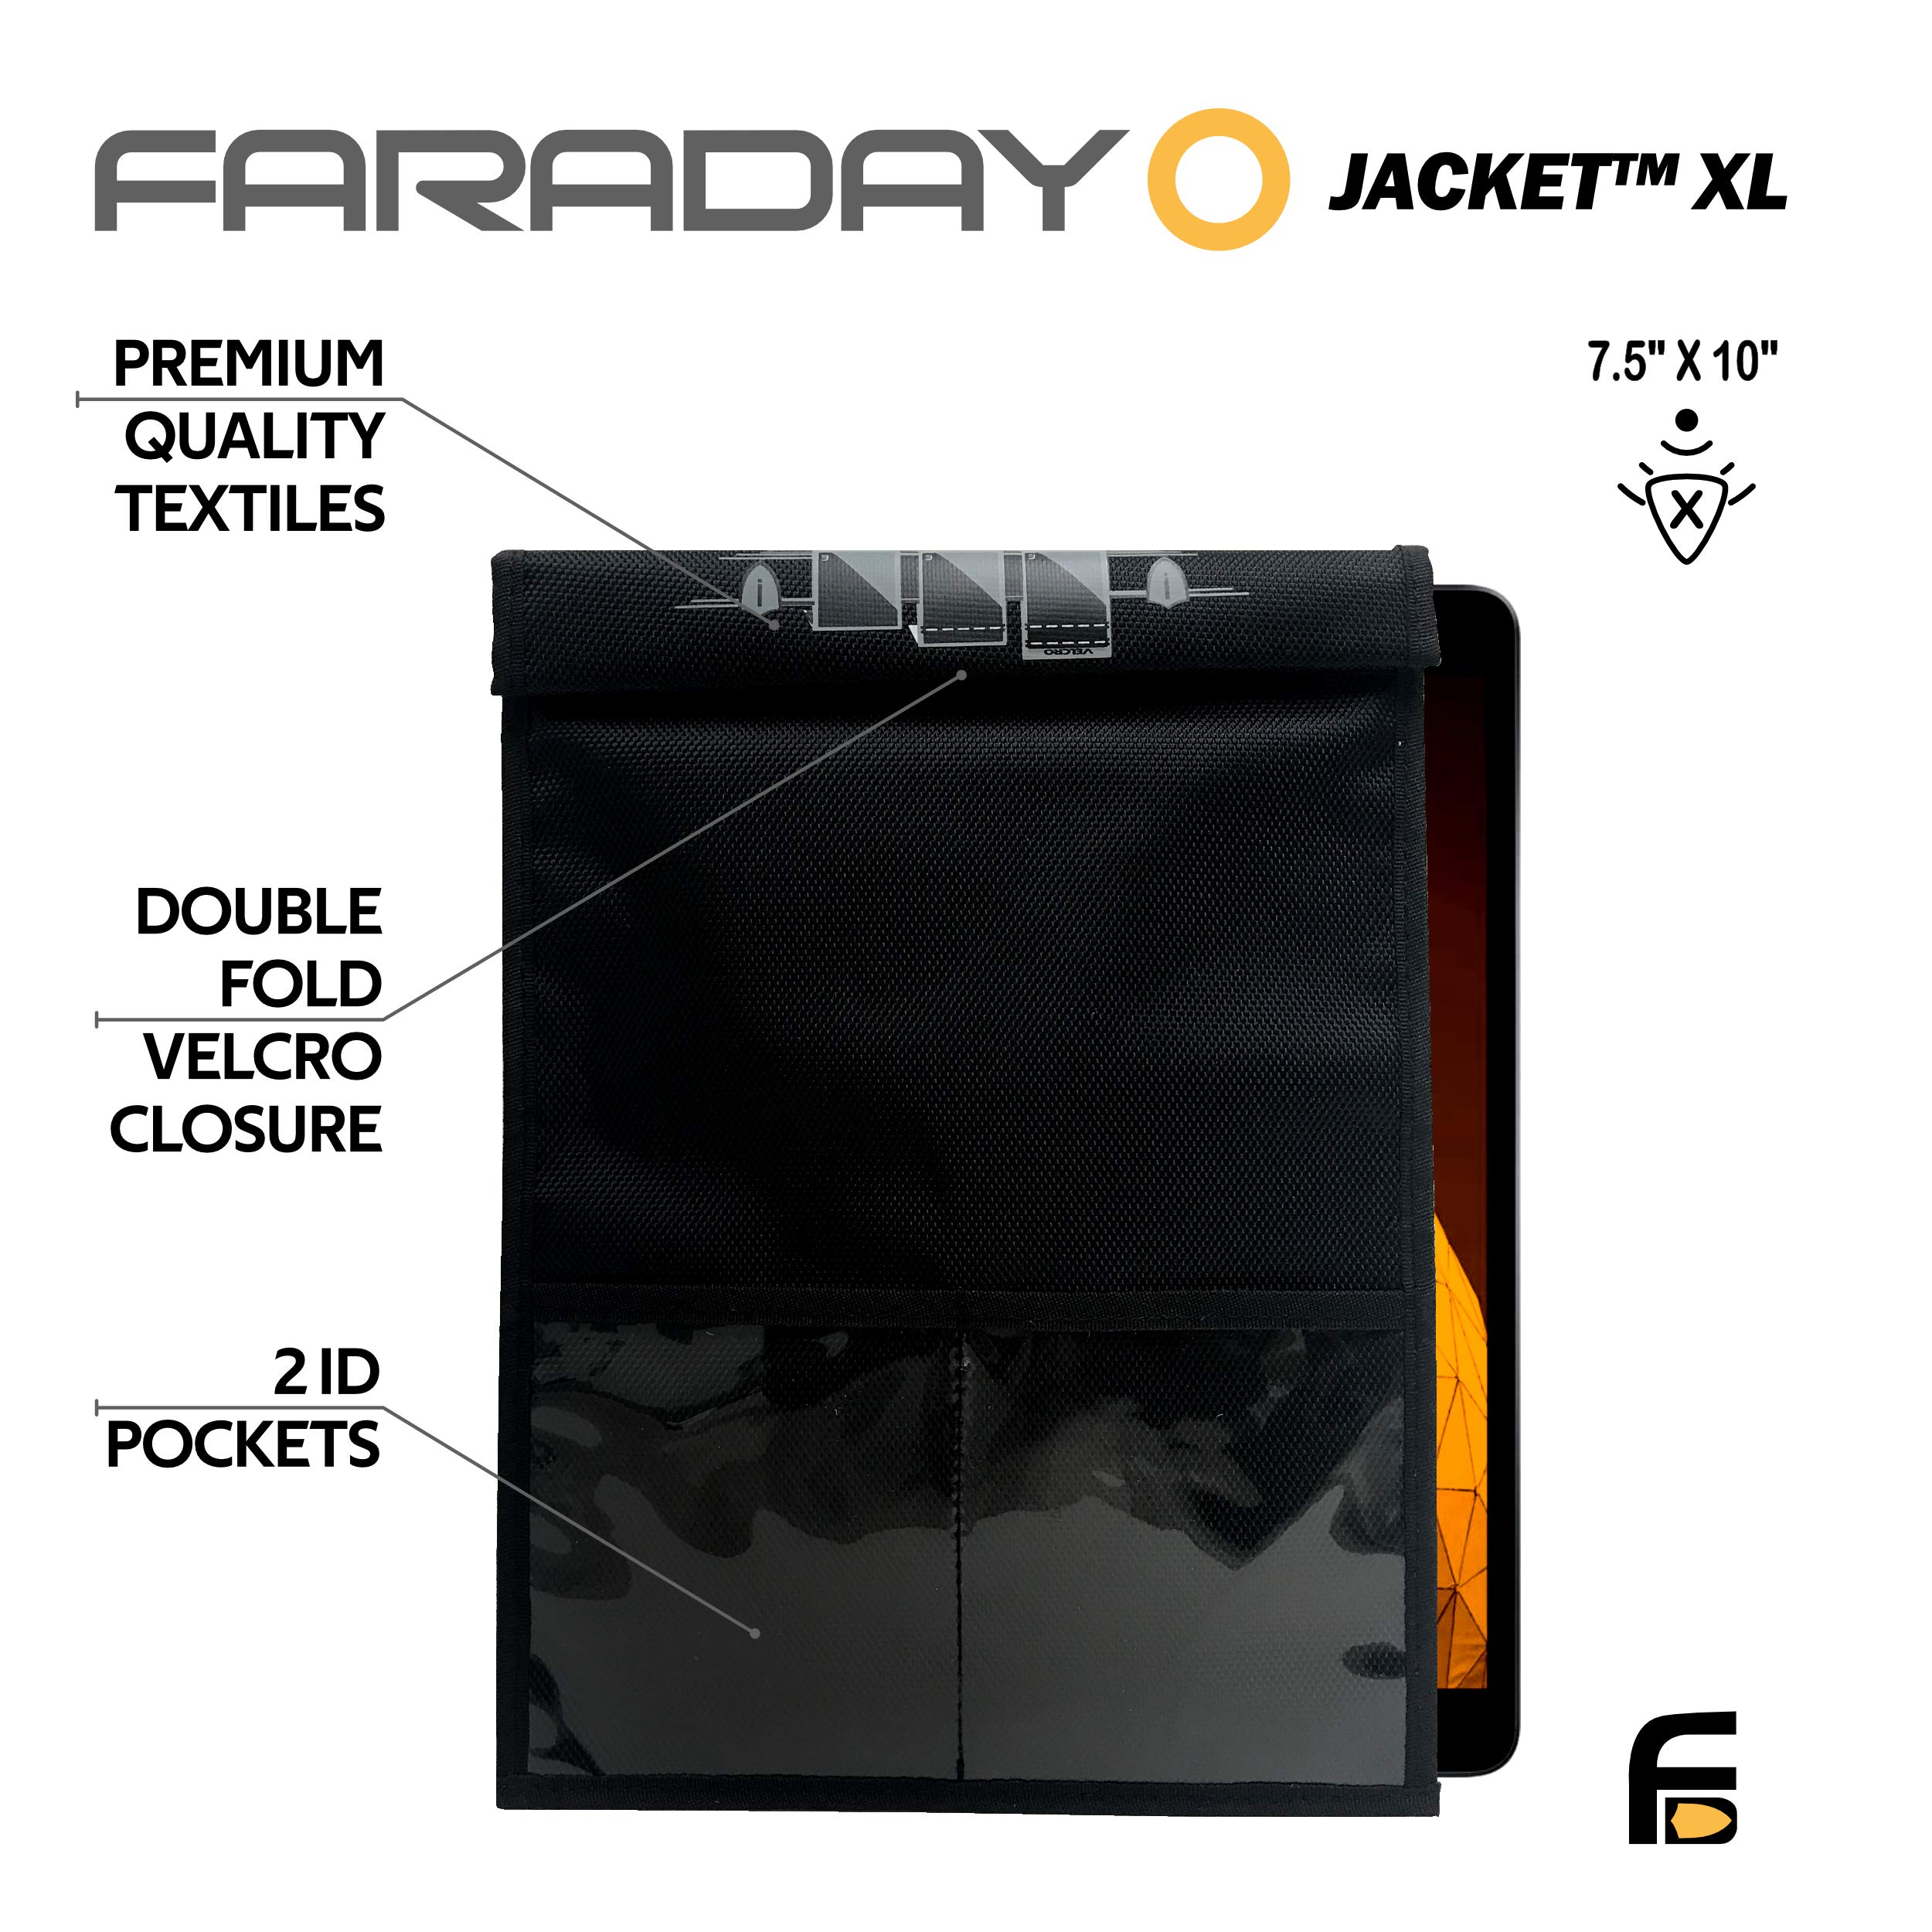 Faraday Bag XL Heavy Duty Black Canvas Kit - for Cell Phones, Tablets, Key FOBs, Passports, Credit Cards - EMP CME Signal Shielding for Law Enforcement and Military